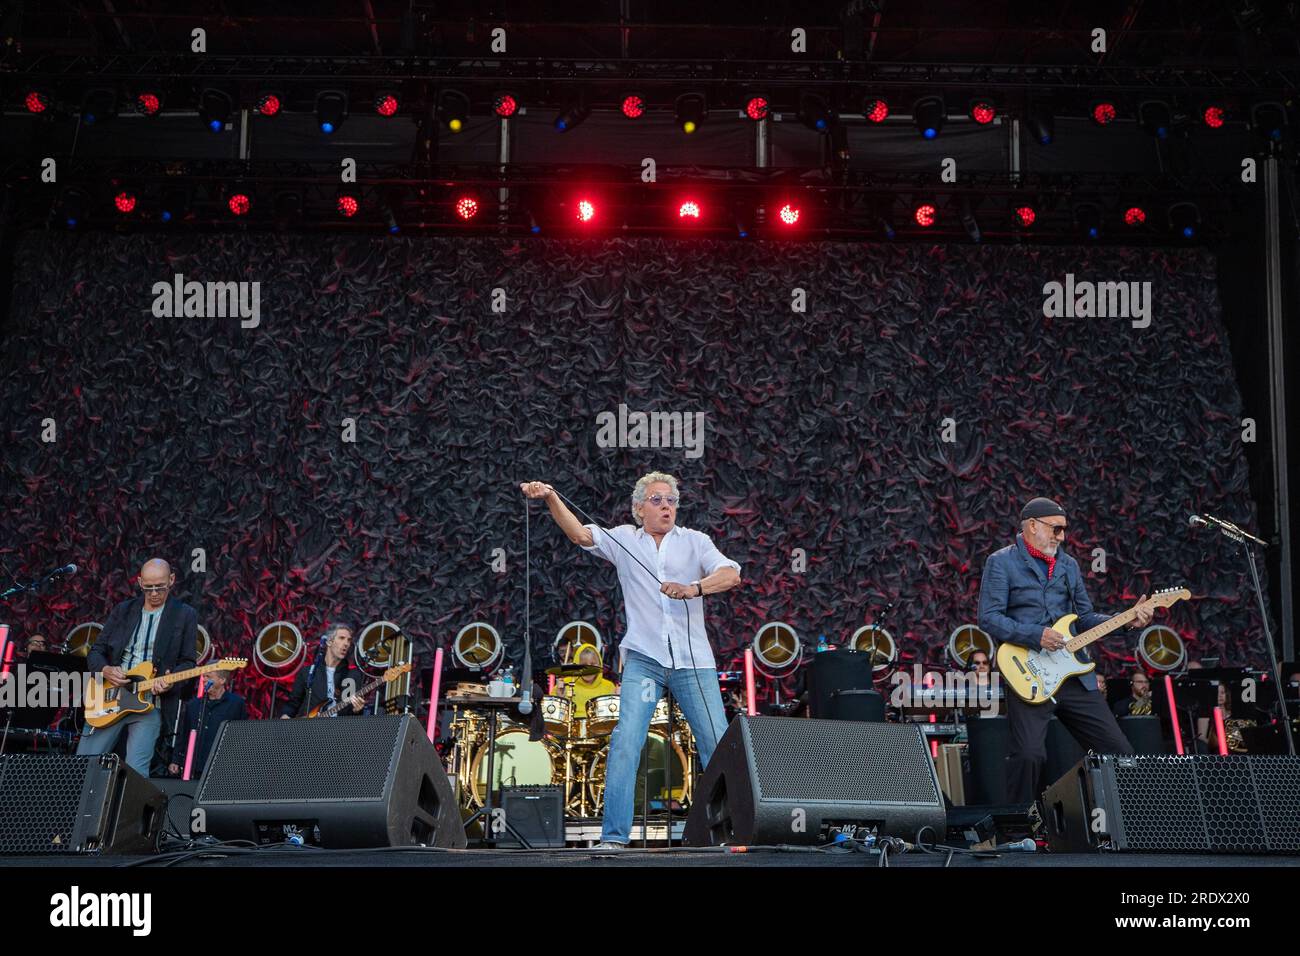 Hove, UK. Sunday 23 July 2023. (L-R) Simon Townshend, John Button, Zak Starkey, Roger Daltrey, and Pete Townshend  of the English rock band The Who performs on stage at   The 1st Central County Ground  © Jason Richardson / Alamy Live News Stock Photo